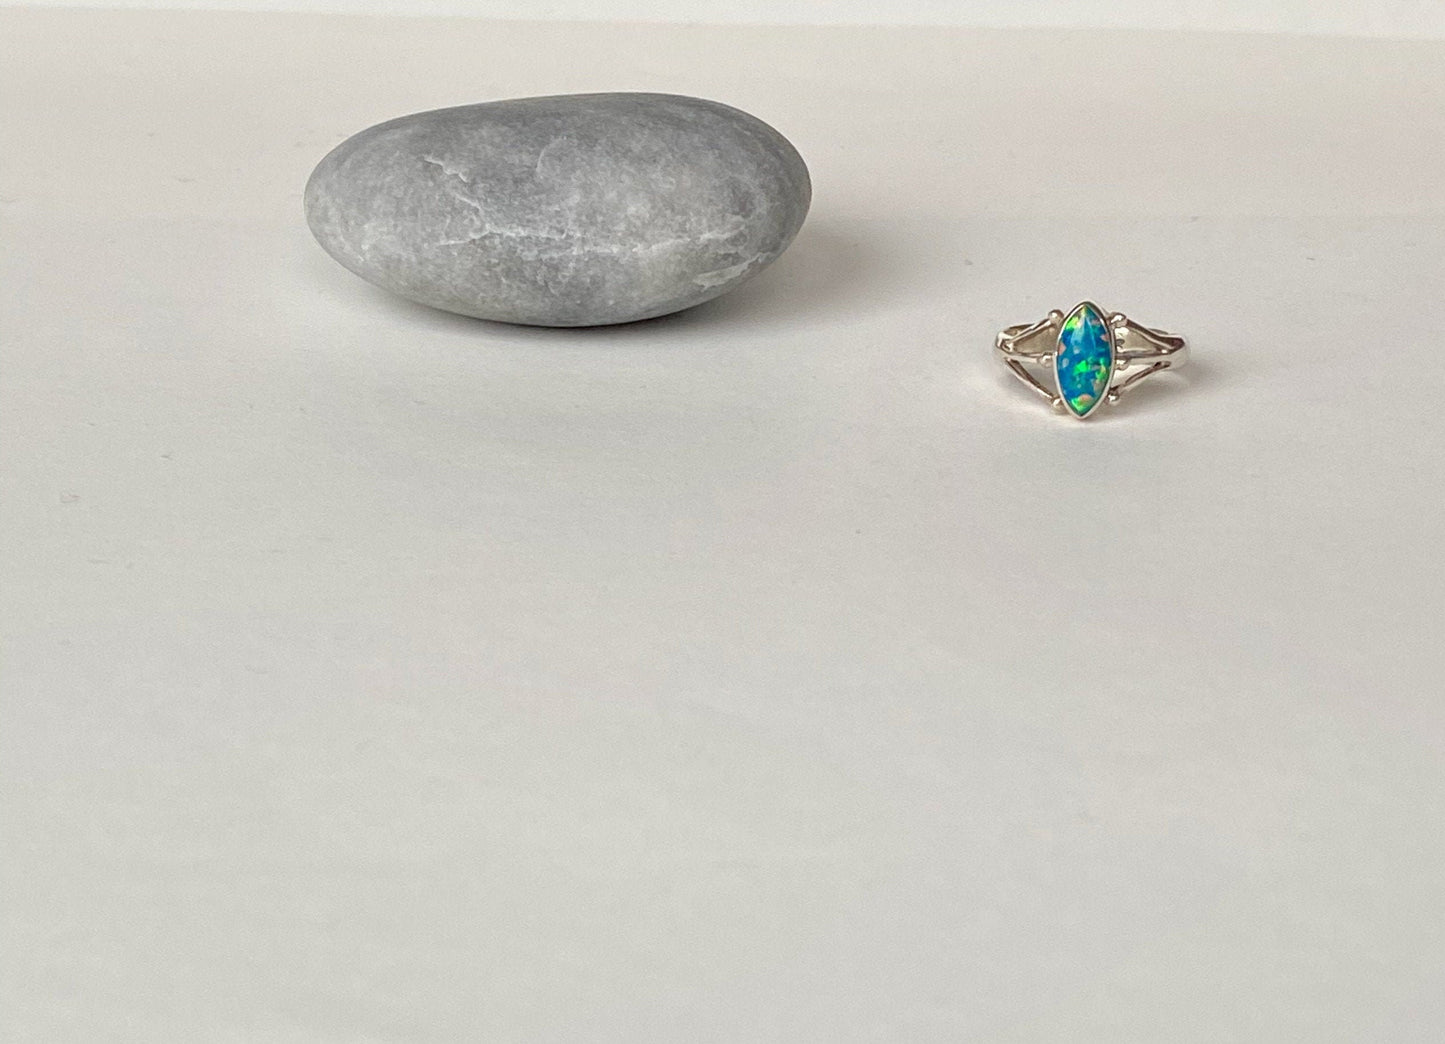 Beautiful size 5 3/4" blue fire opal and sterling silver ring.